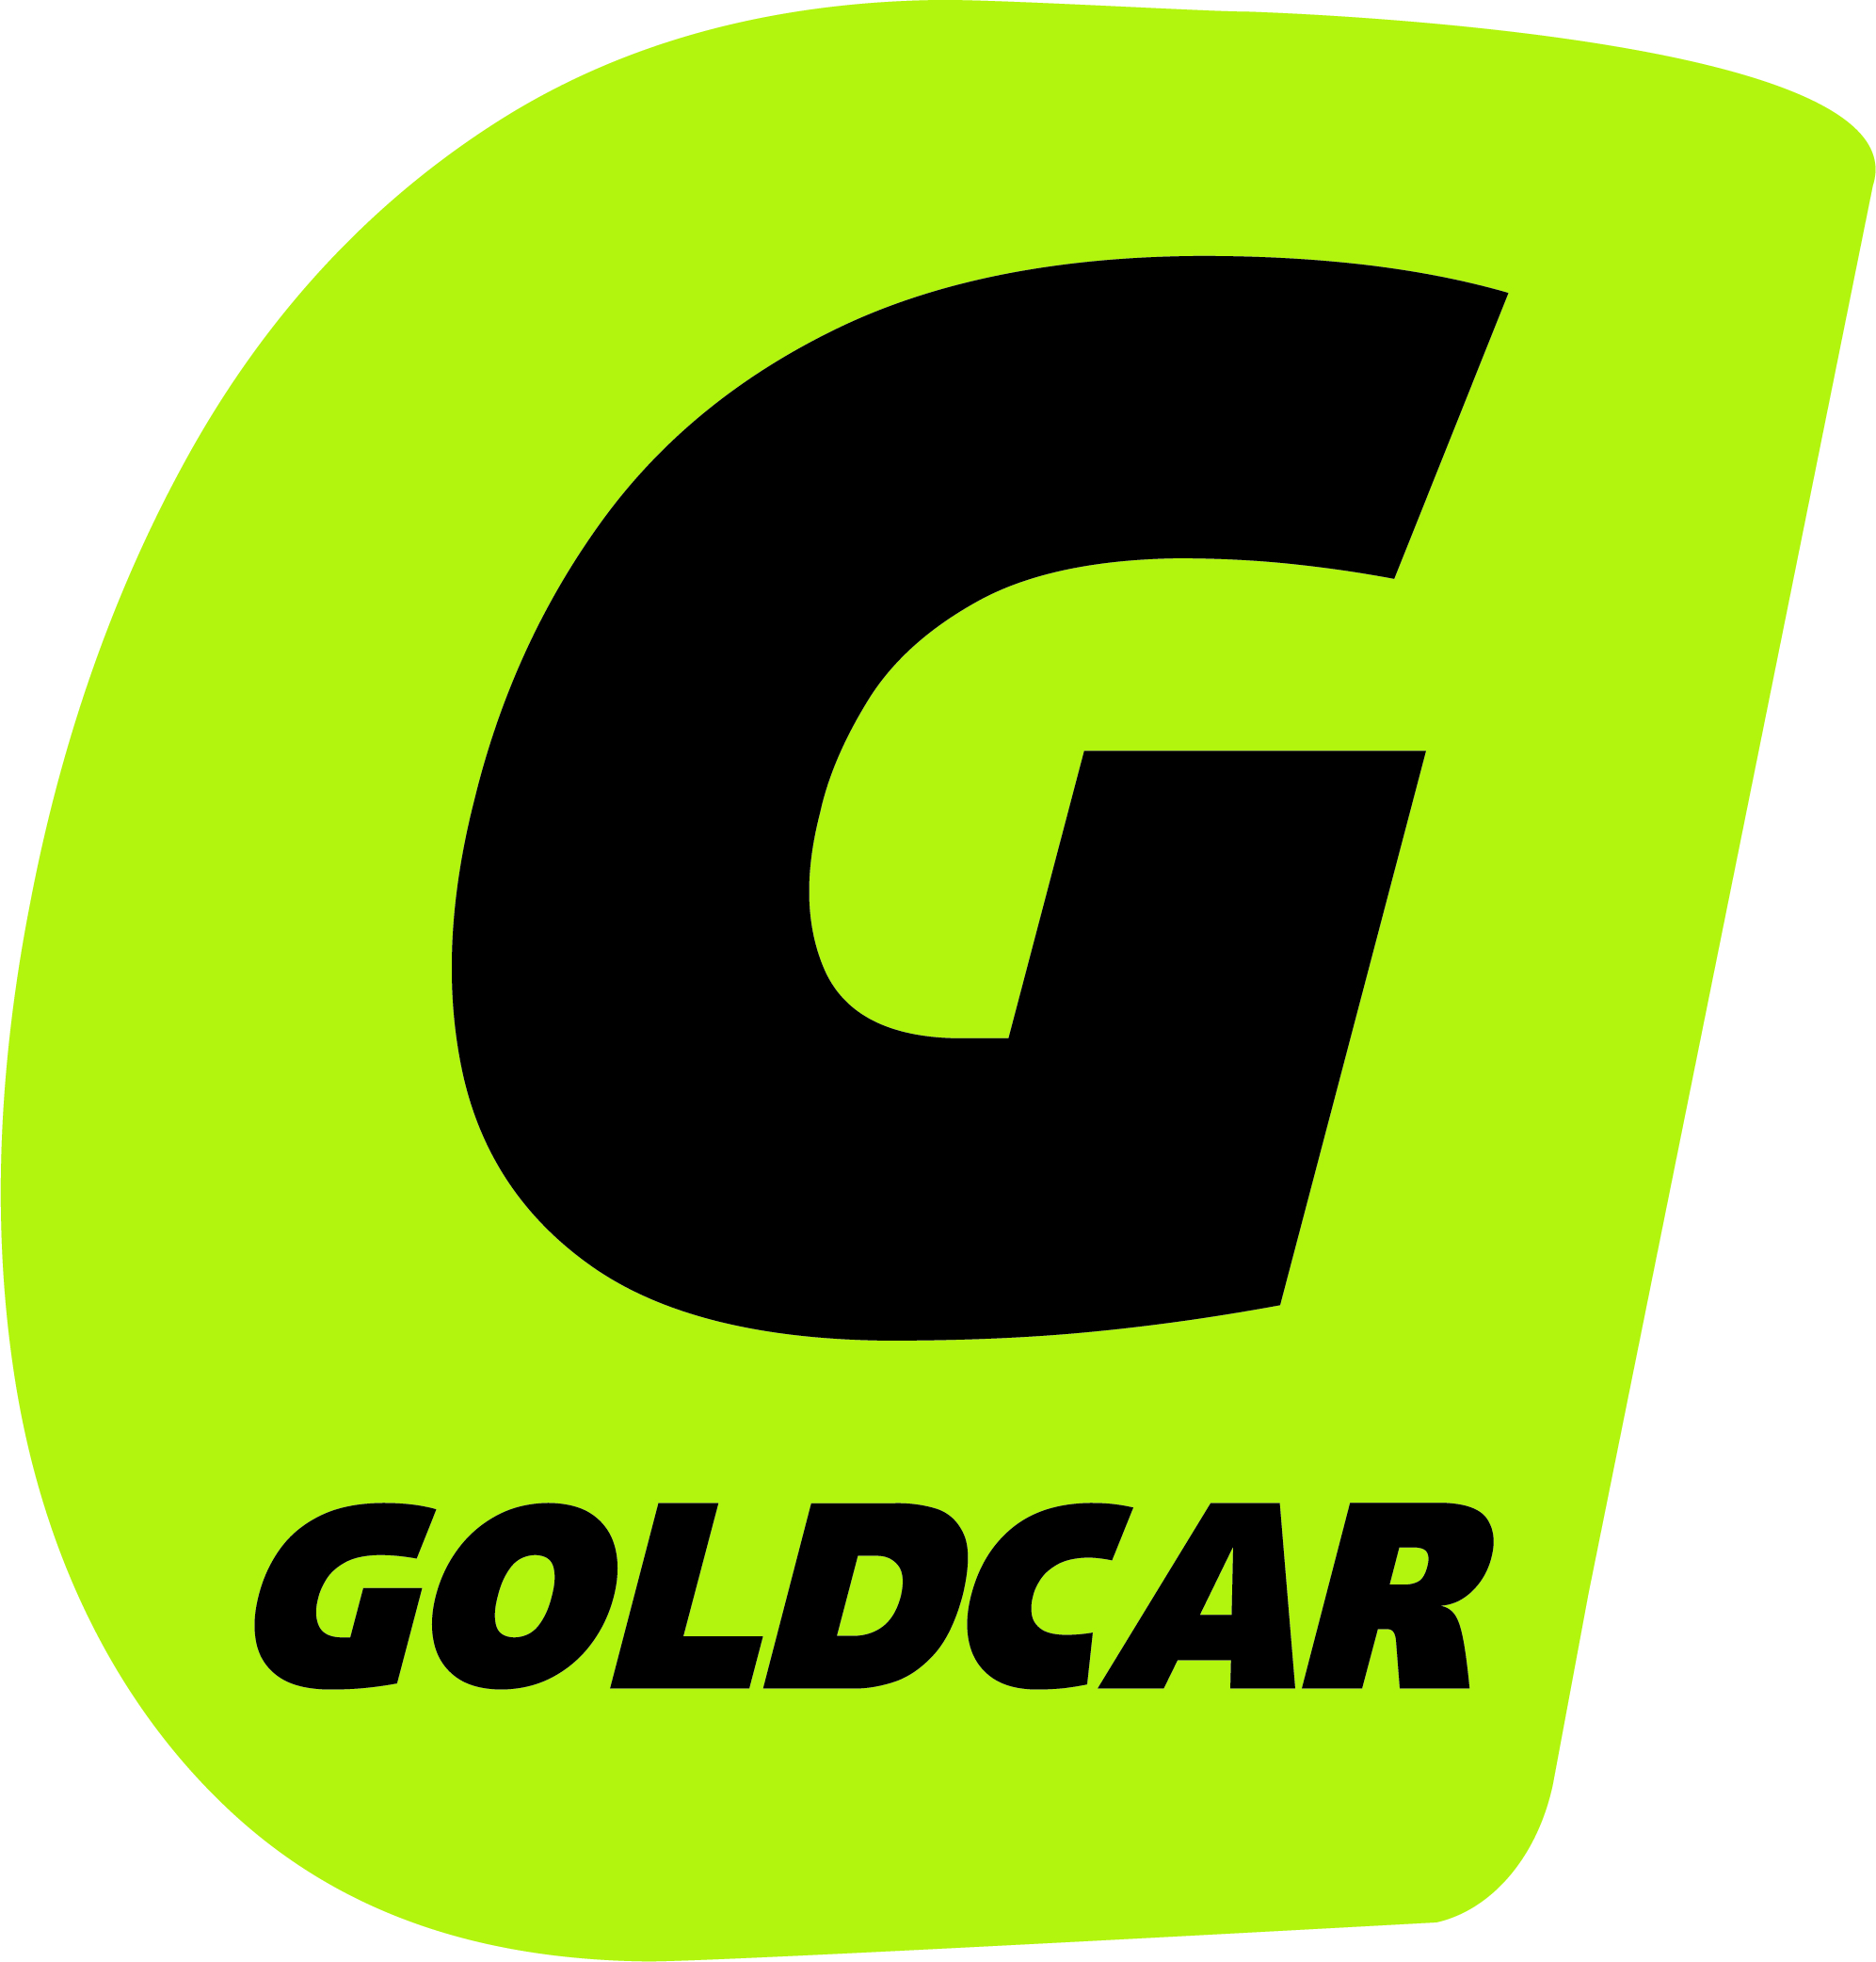 Goldcar alquiler coches